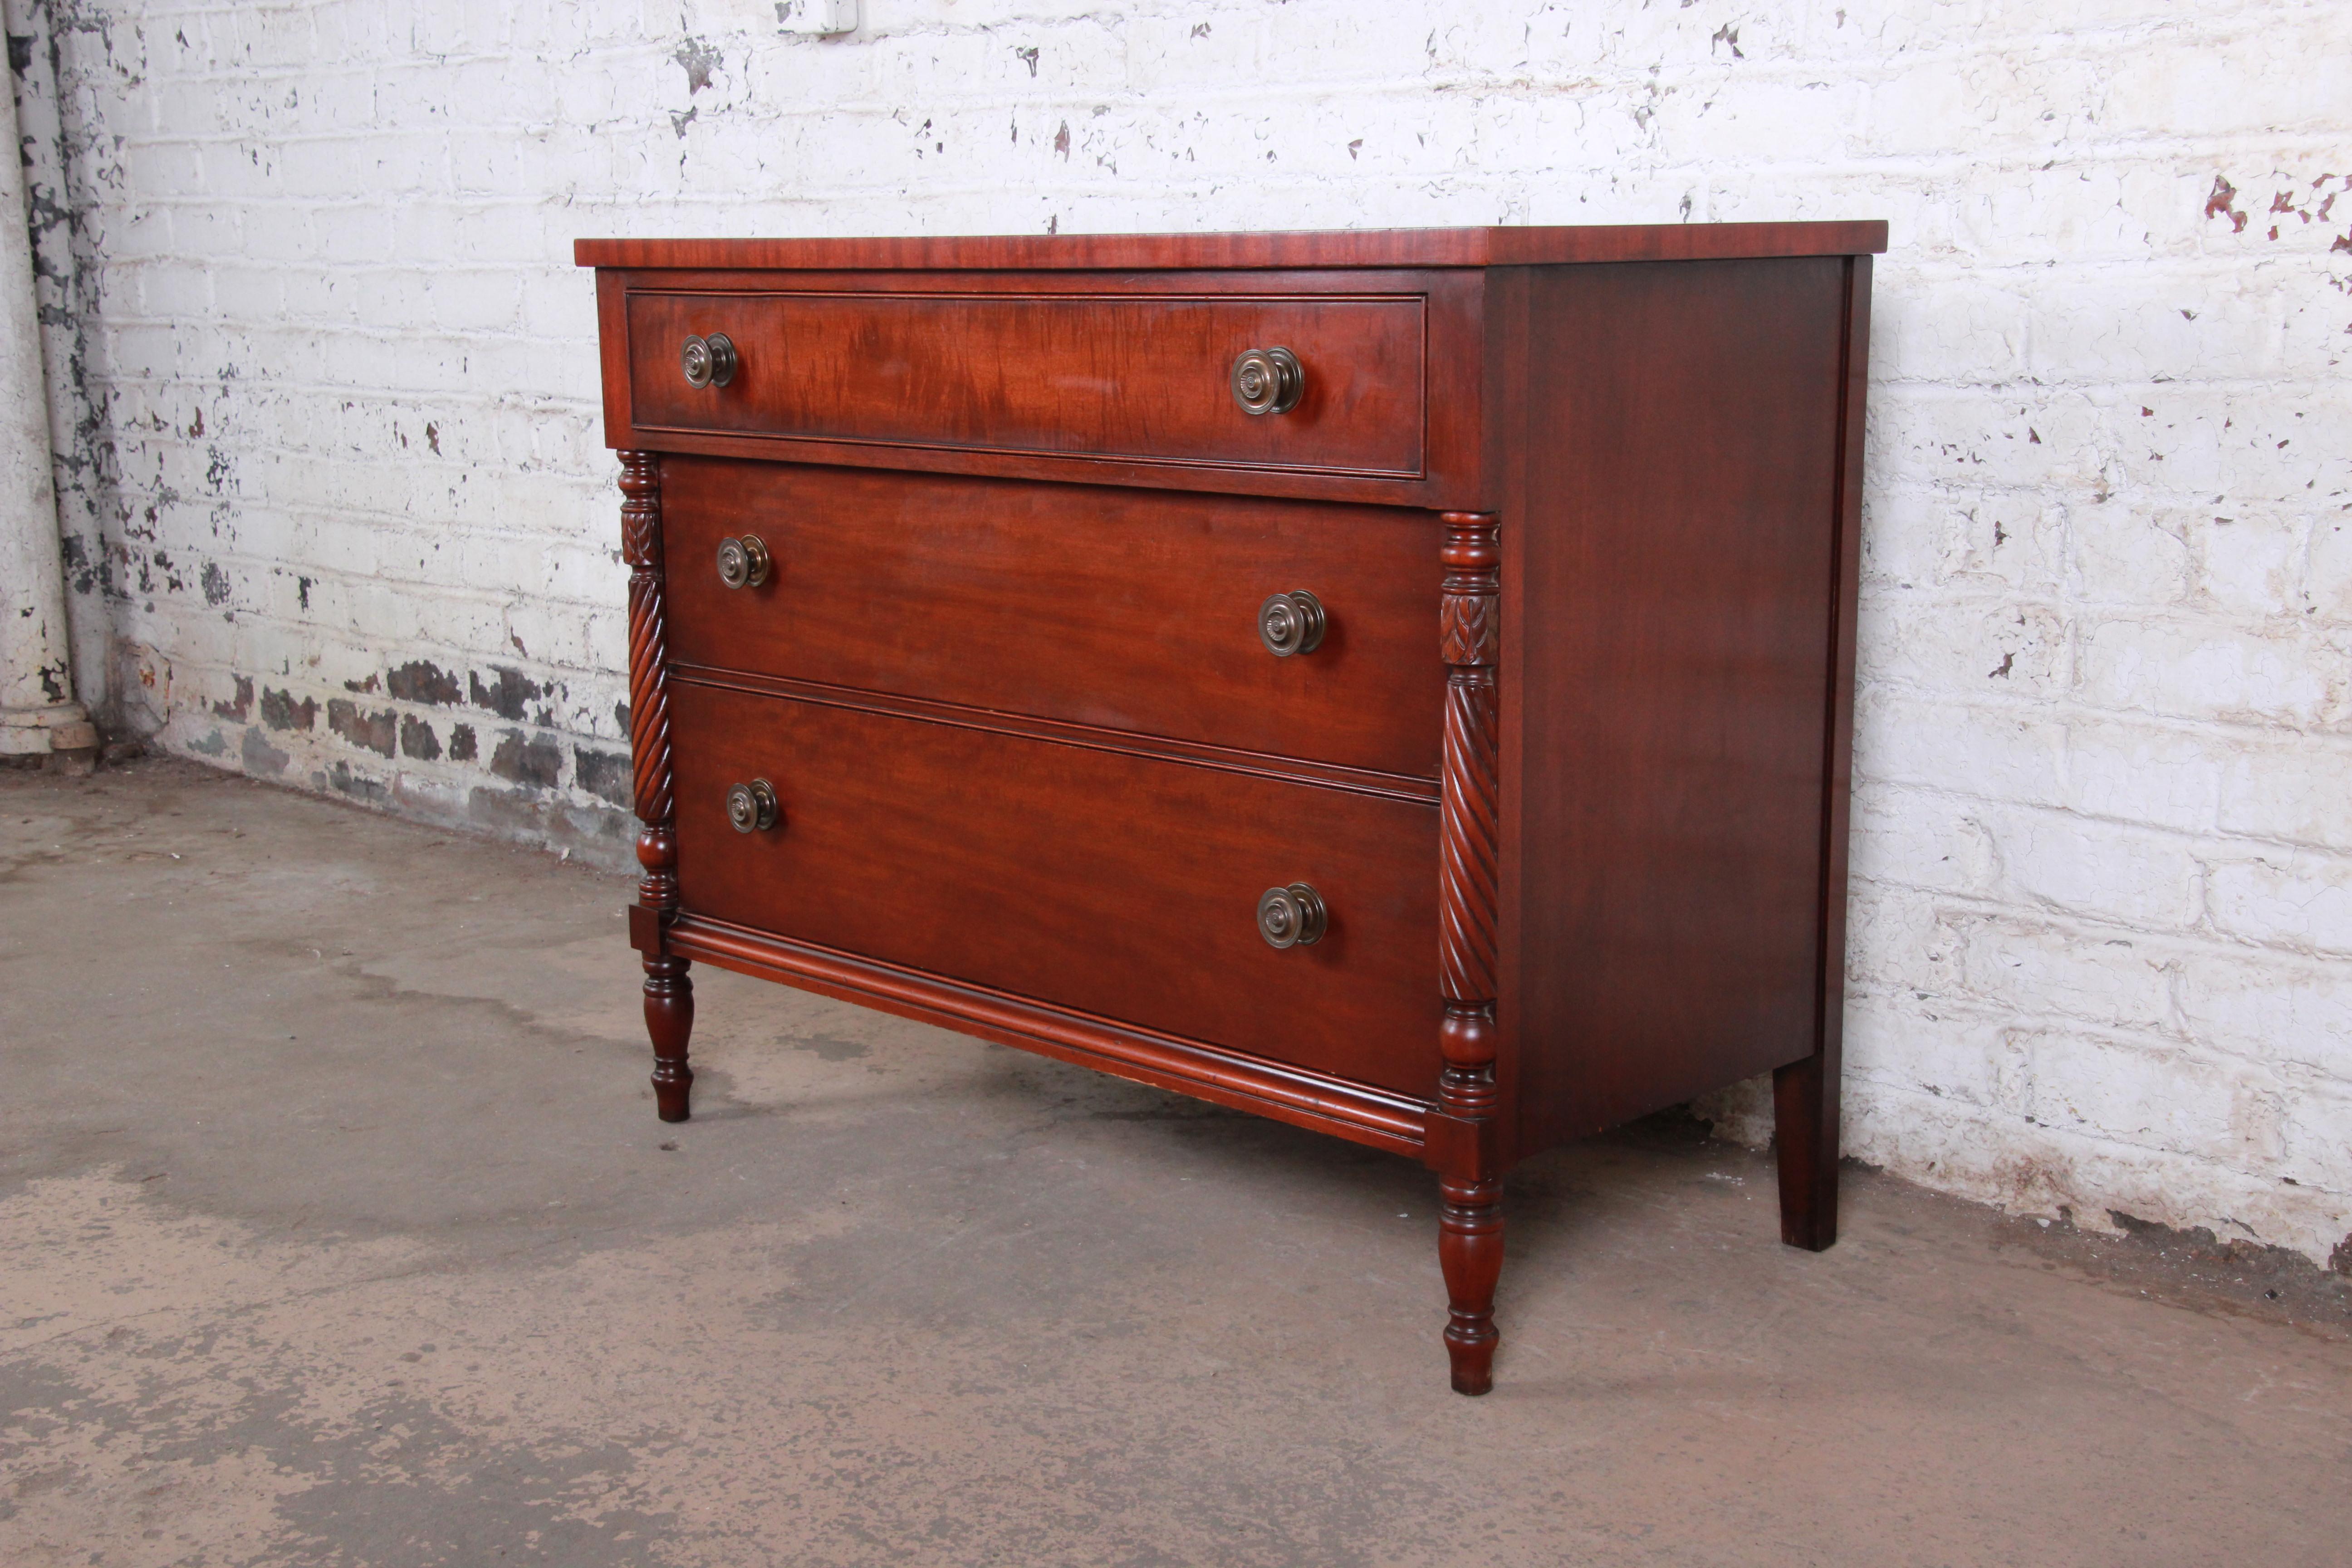 A gorgeous carved mahogany chest of drawers by Kindel Furniture of Grand Rapids. The dresser features beautiful mahogany wood grain in the 